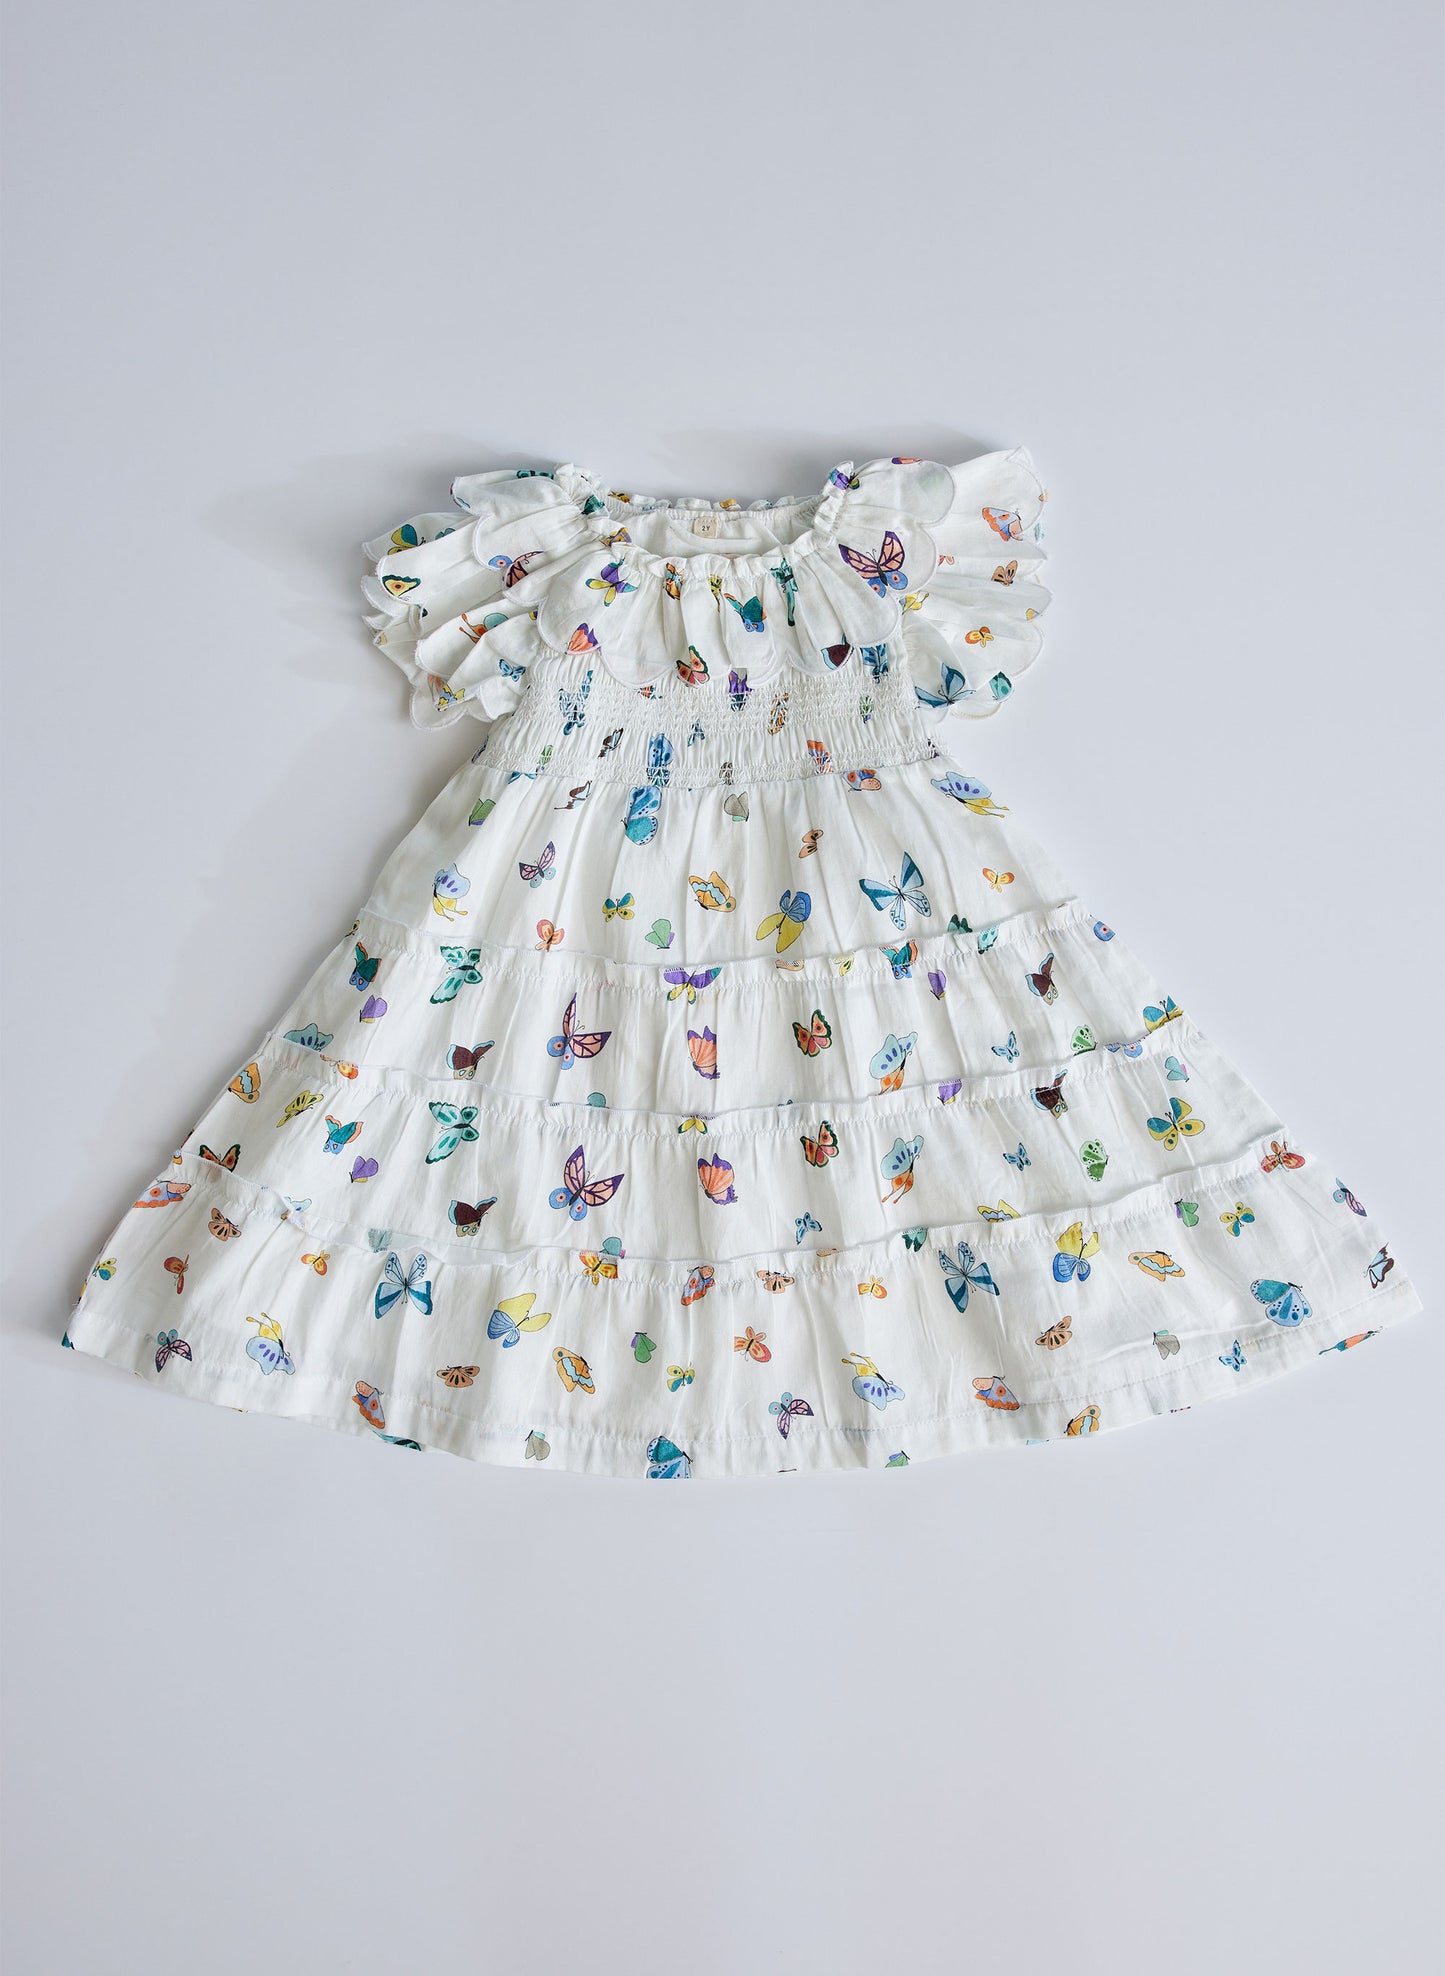 The Mimi Dress - Madame Butterfly Print